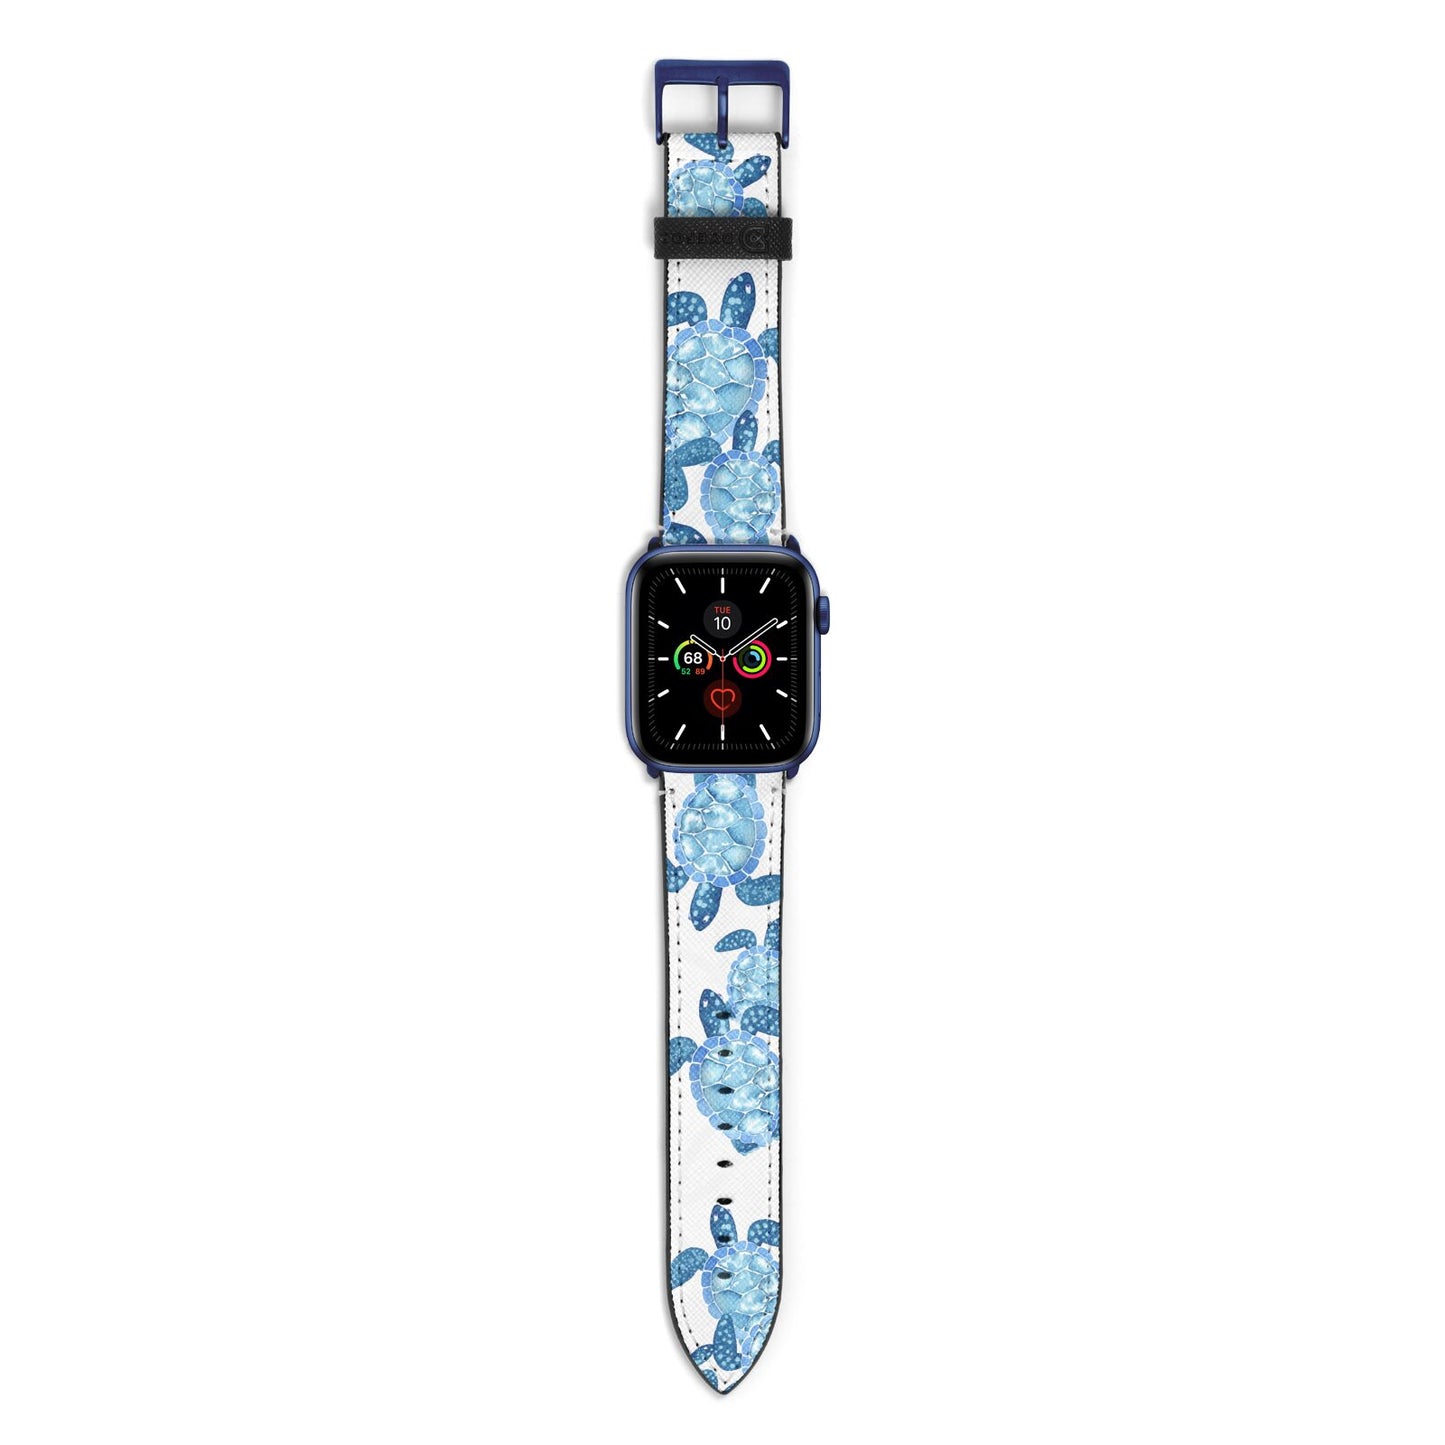 Turtle Apple Watch Strap with Blue Hardware